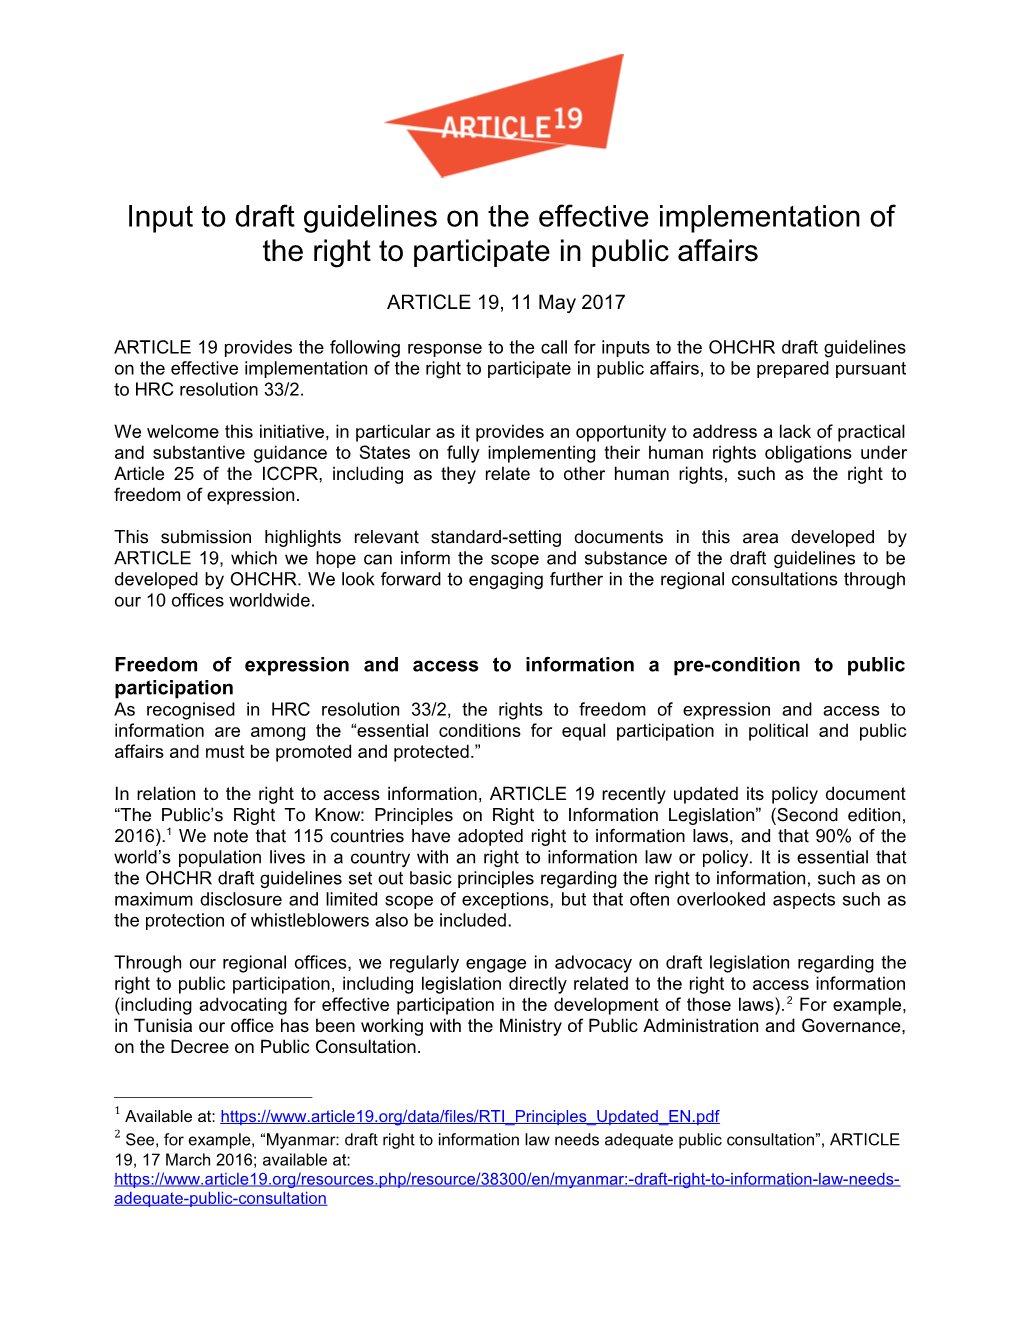 Input to Draft Guidelines on the Effective Implementation of the Right to Participate In